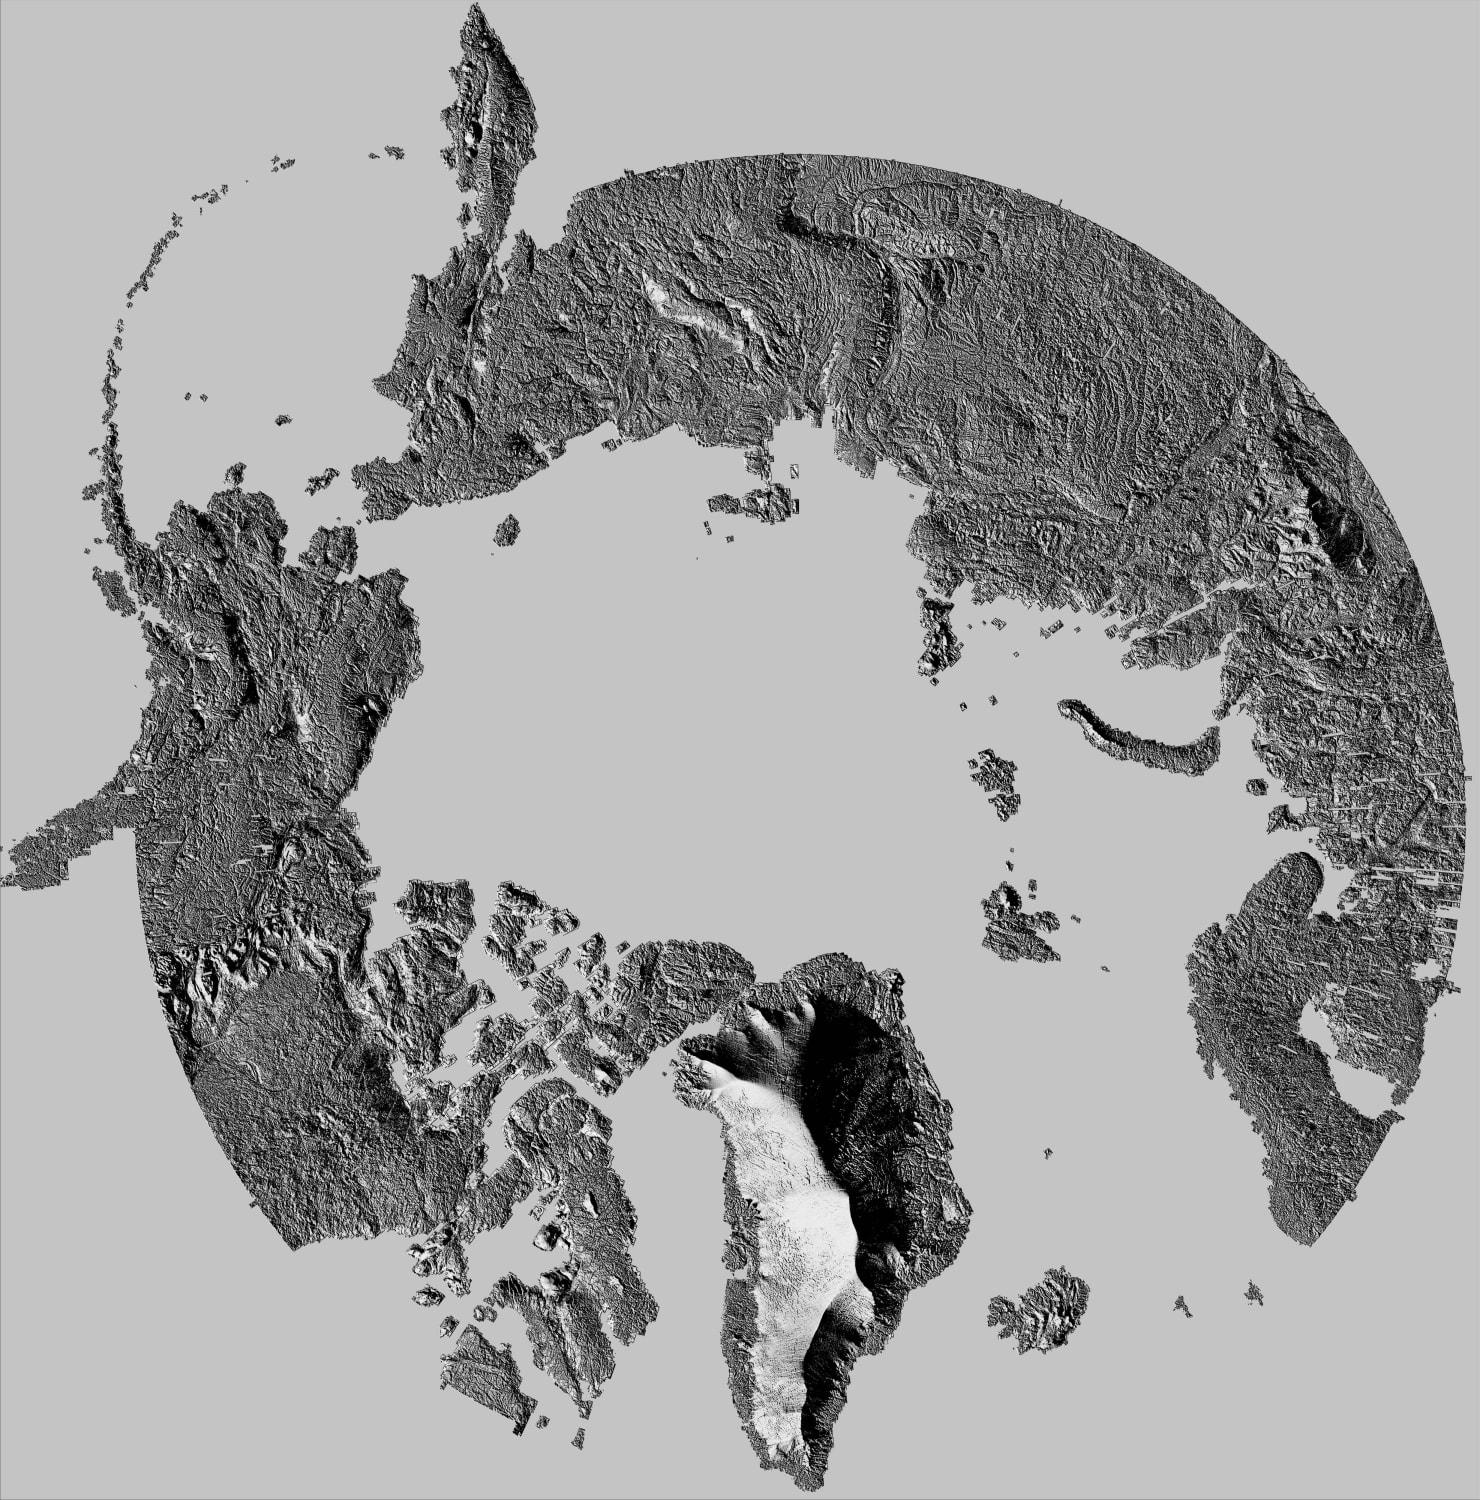 Embossed DEM of Artic: Is the relative elevation of Greenland correct?